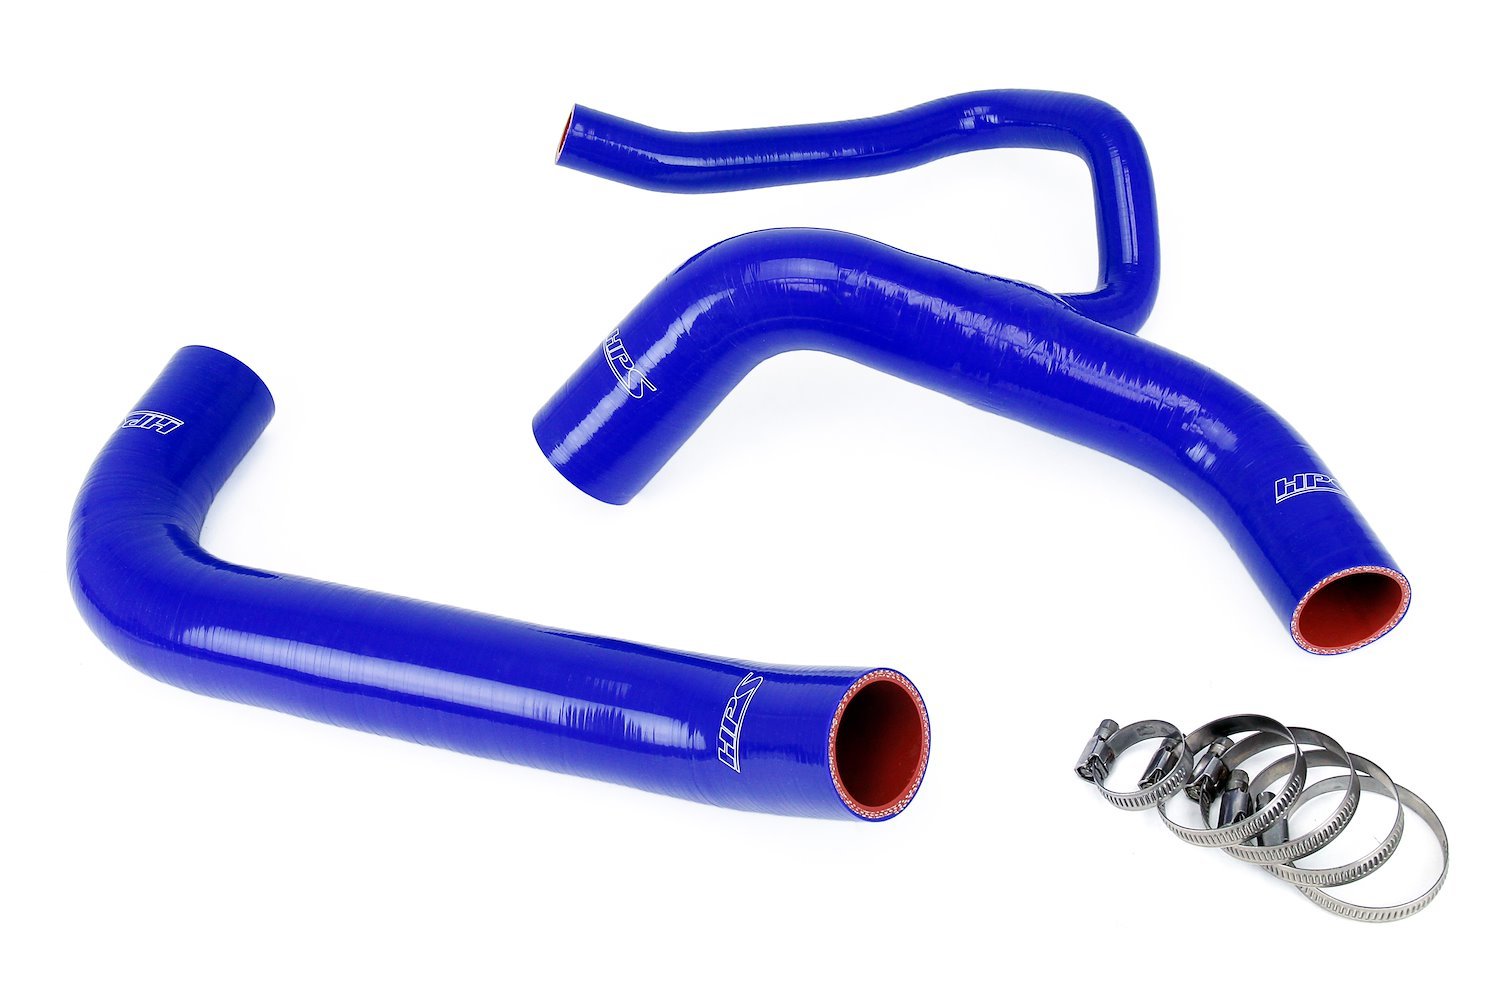 57-1848-BLUE Radiator Hose Kit, 3-Ply Reinforced Silicone, Replaces Rubber Radiator Coolant Hoses